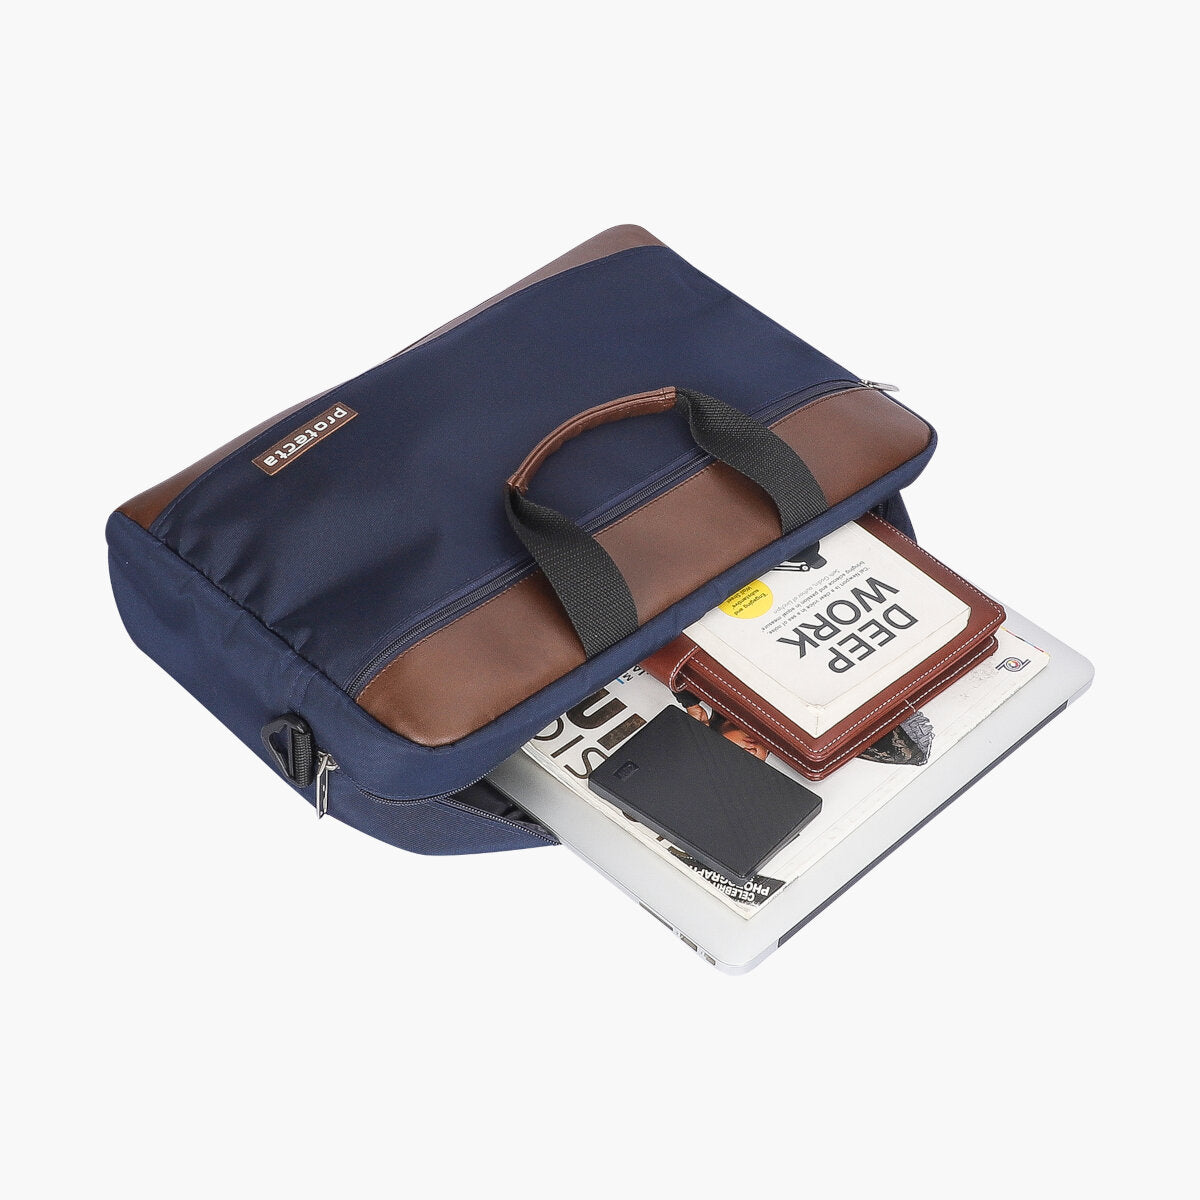 Navy | Protecta The Underdog Convertible Briefcase Backpack - Main